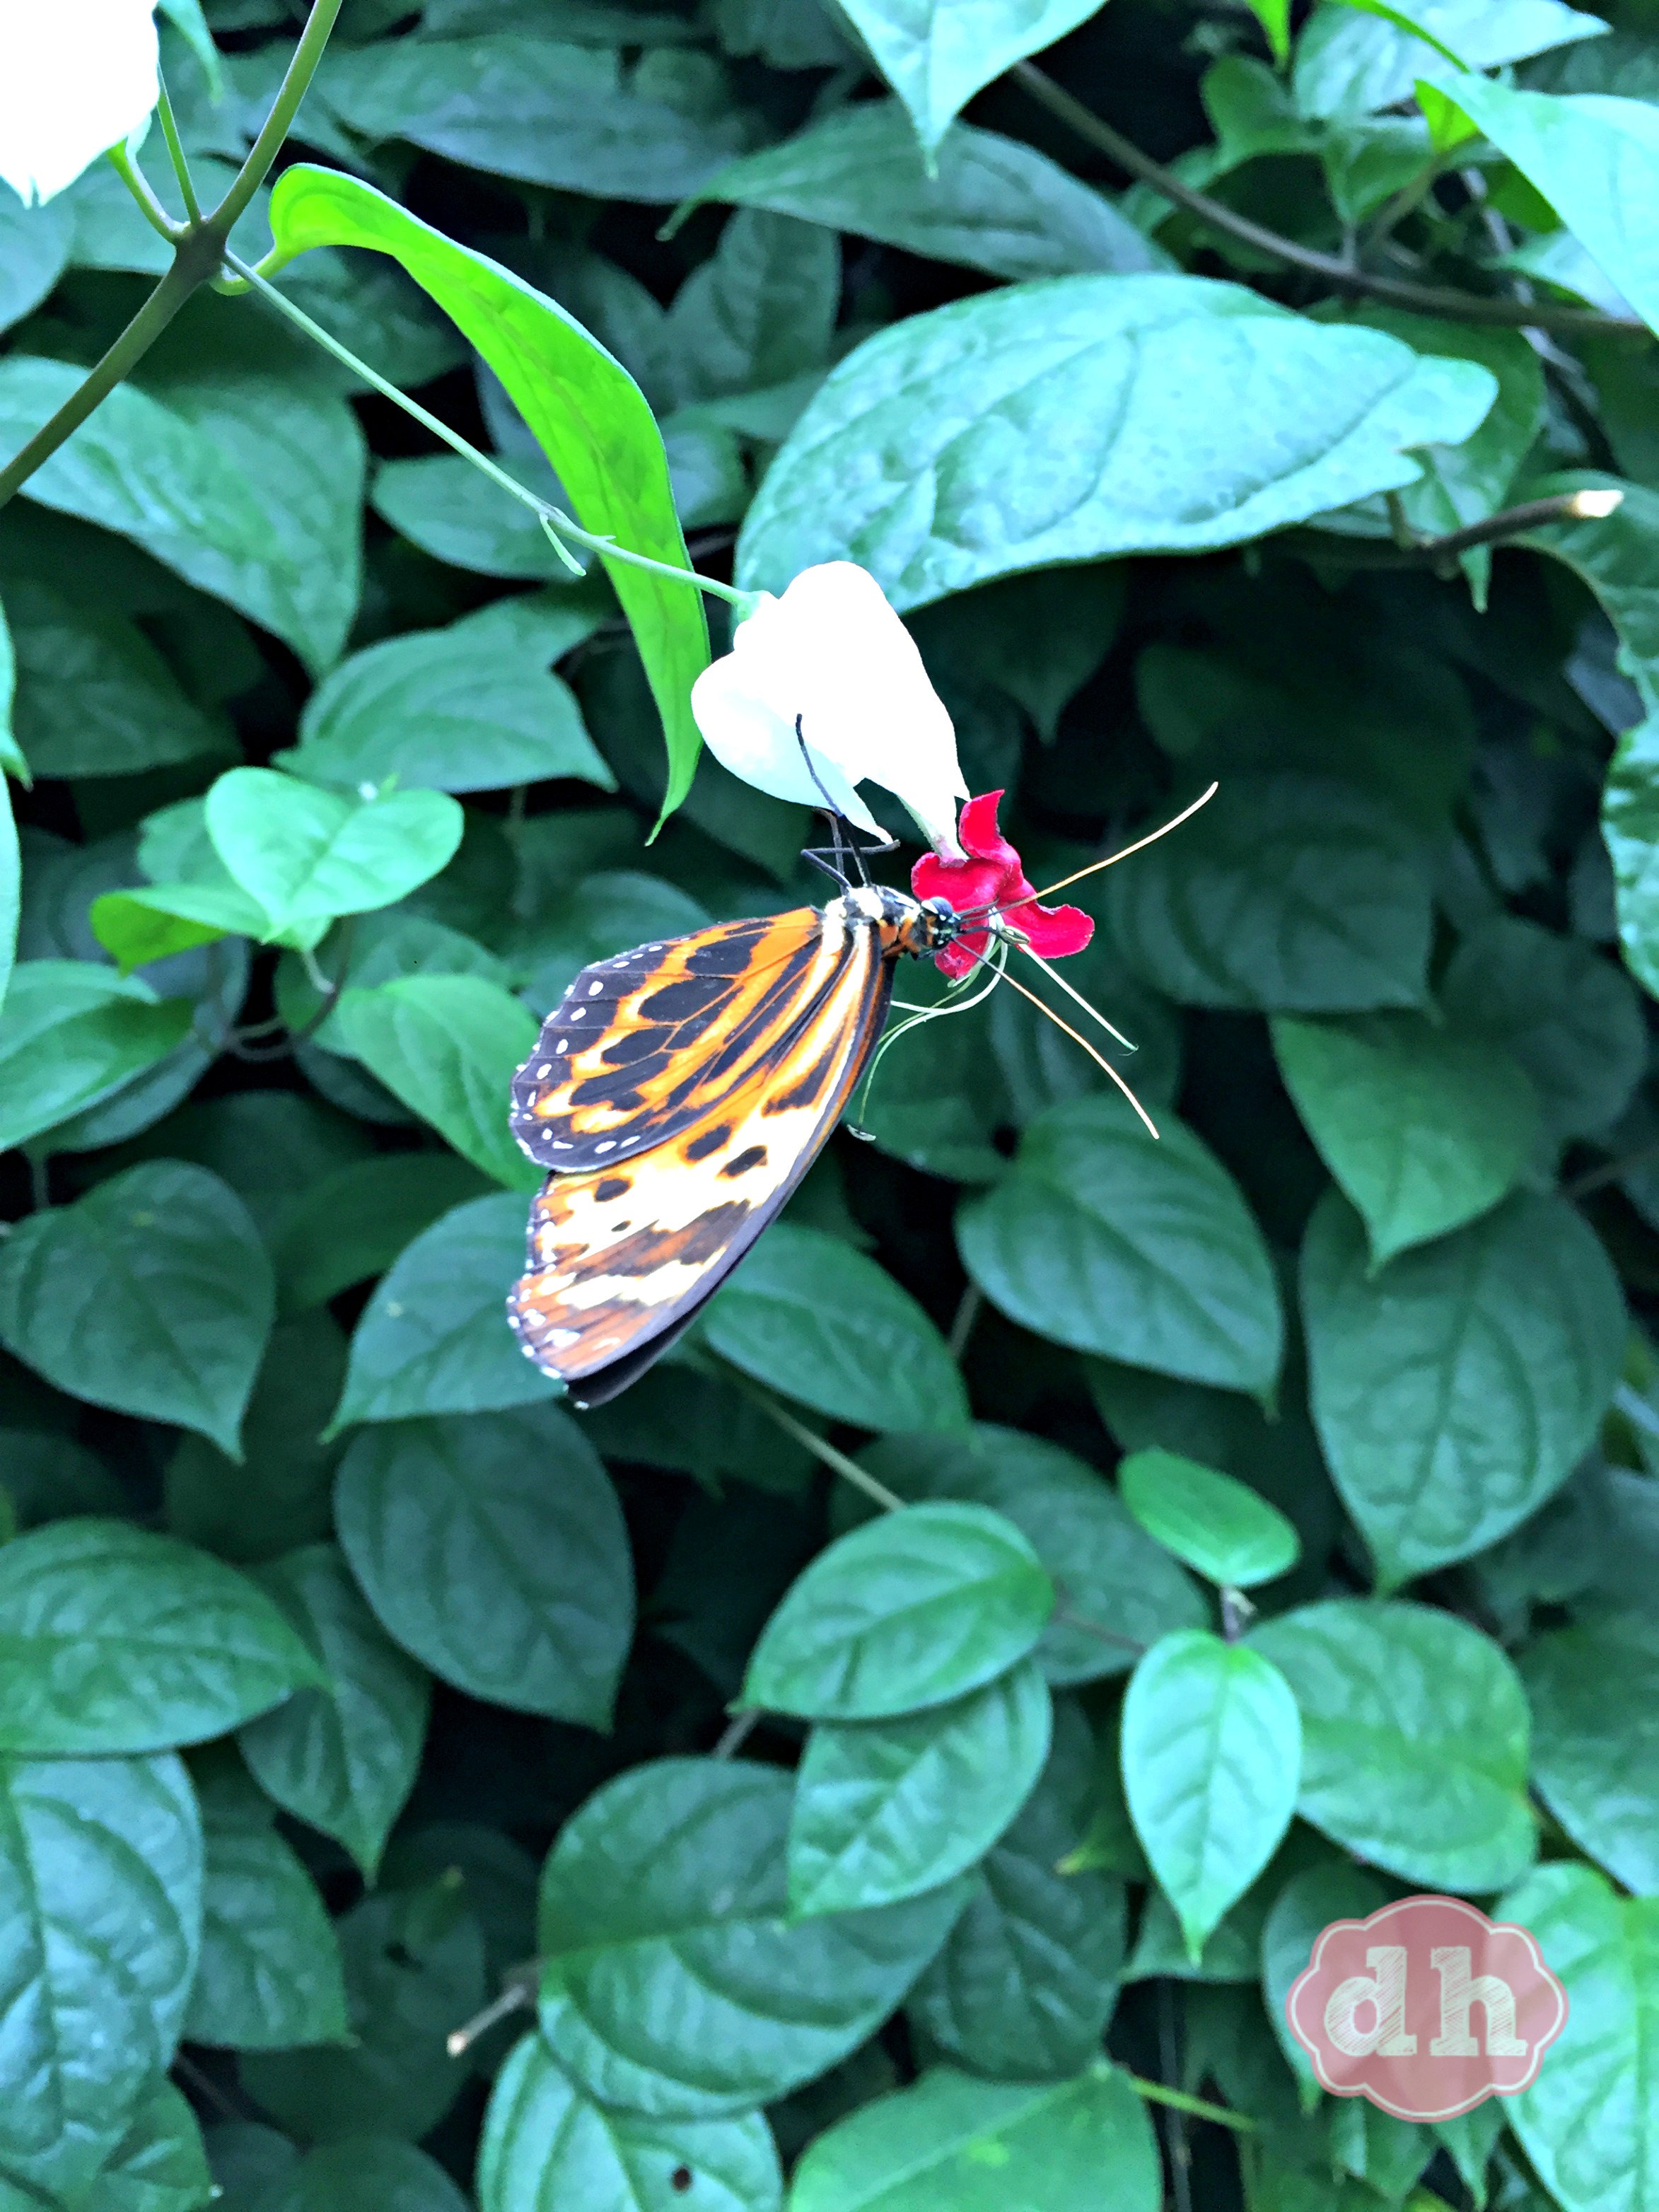 Sertoma Butterfly House & Marine Cove in Sioux Falls